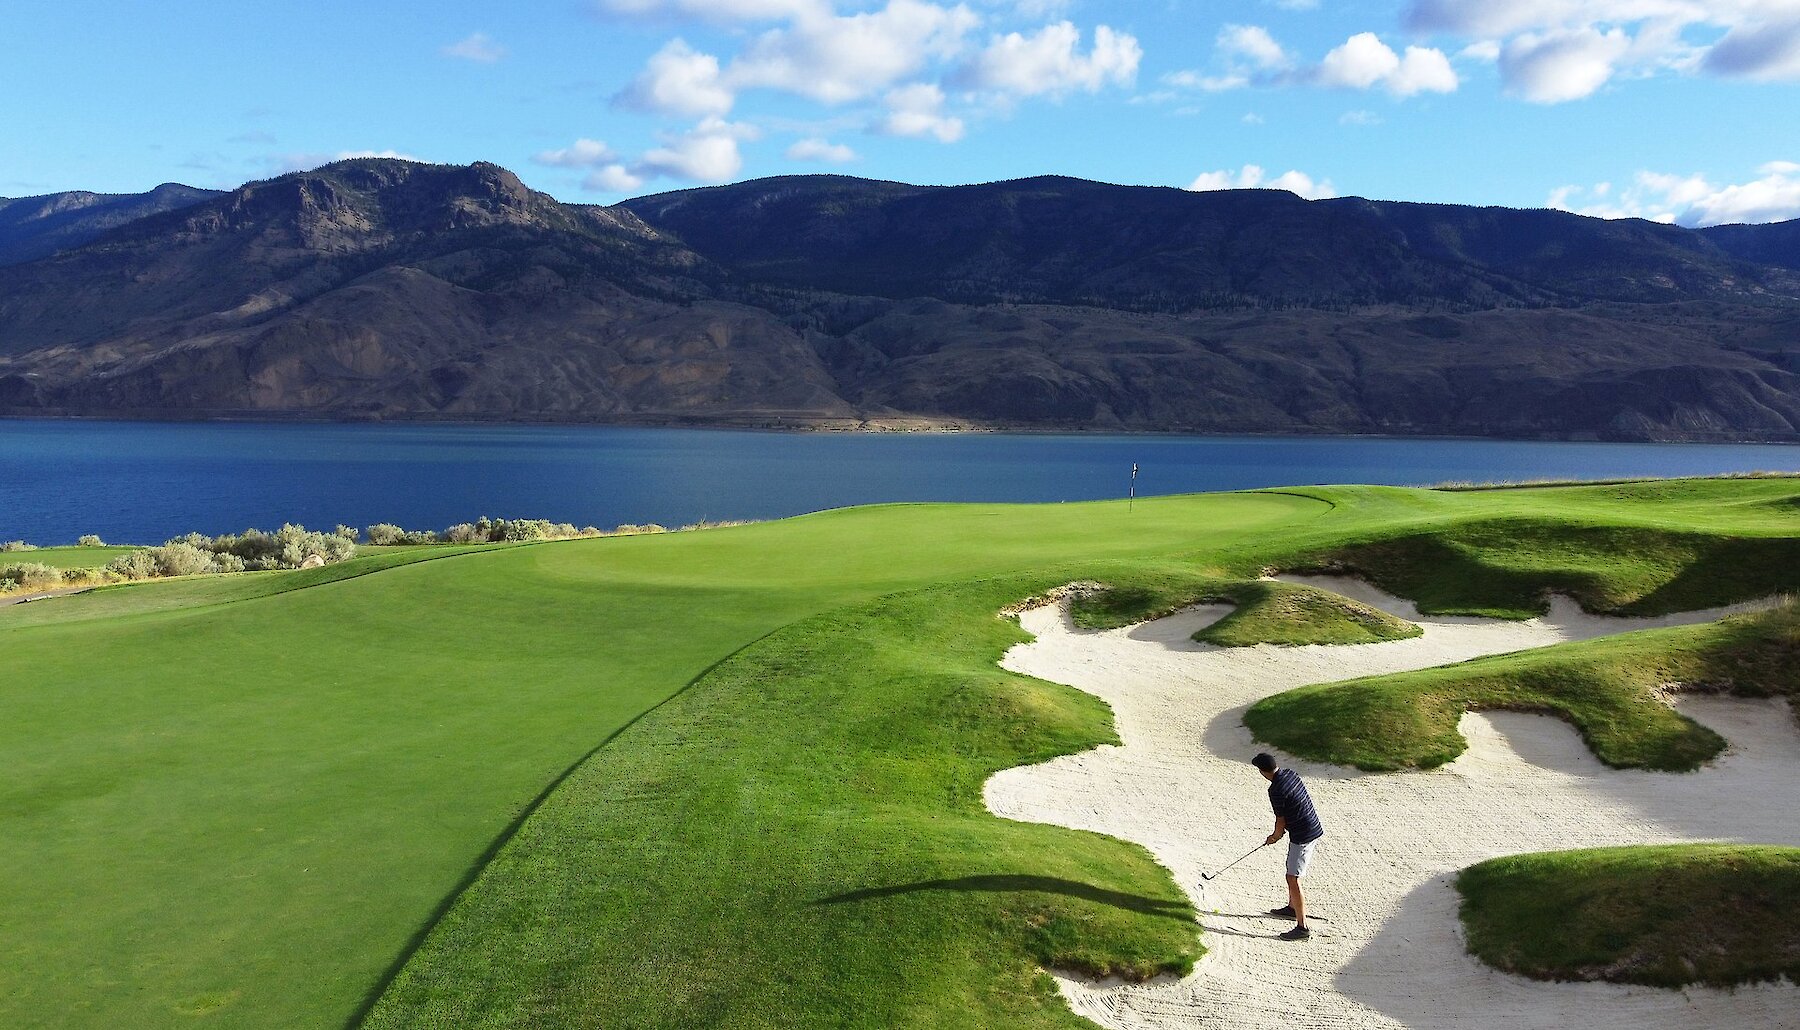 A stunning view of a the Tobiano golf course perched above Kamloops Lake with the BC mountains in the background.